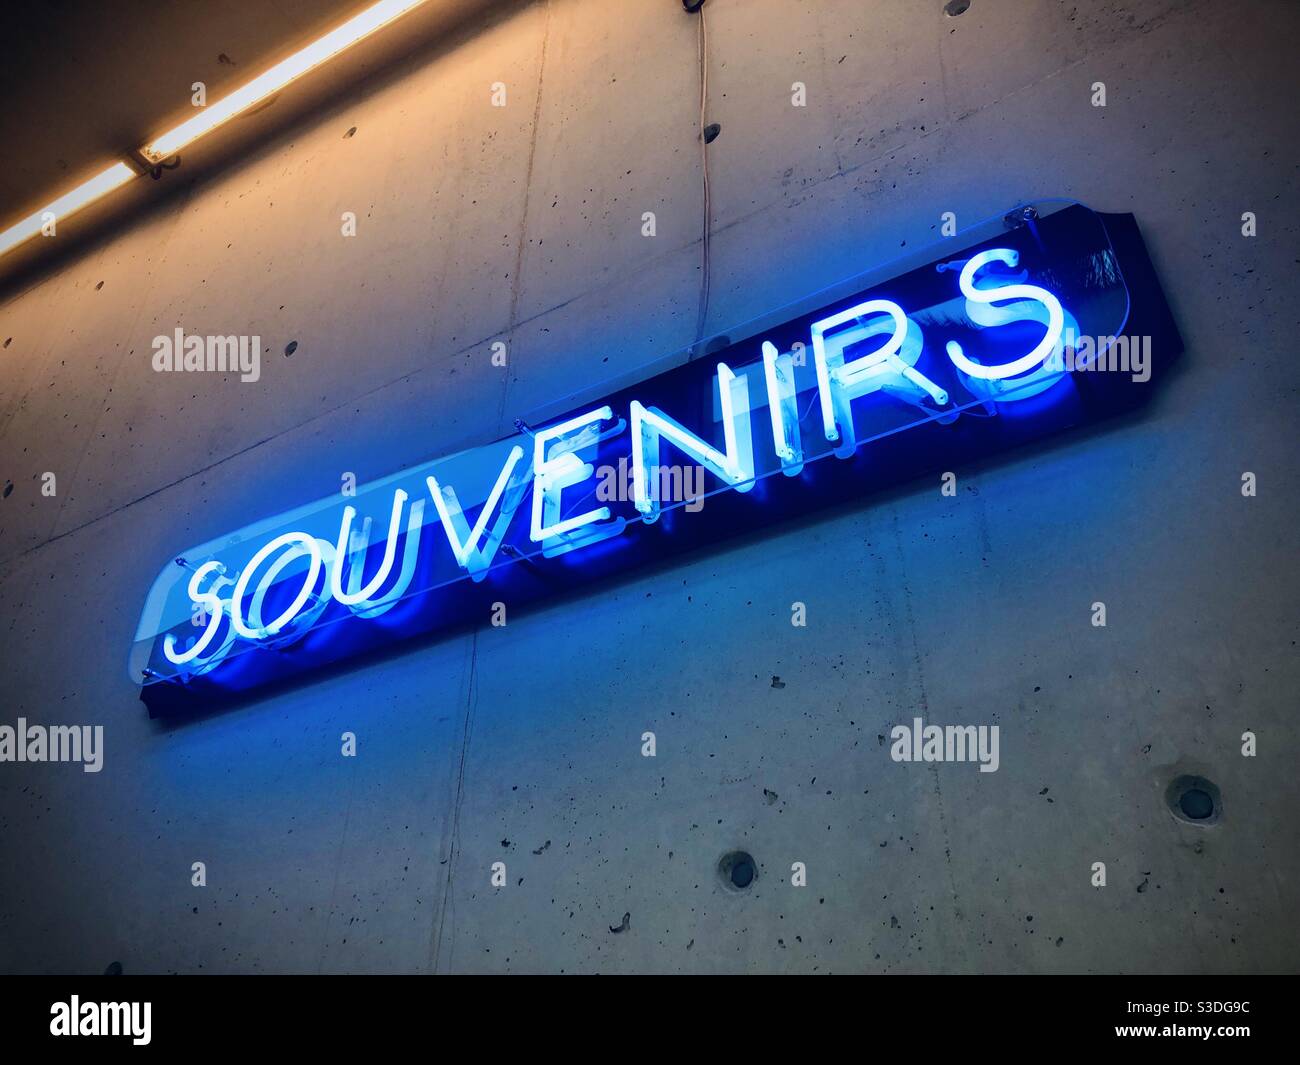 Neon light art showing the word souvenirs on a concrete wall Stock Photo